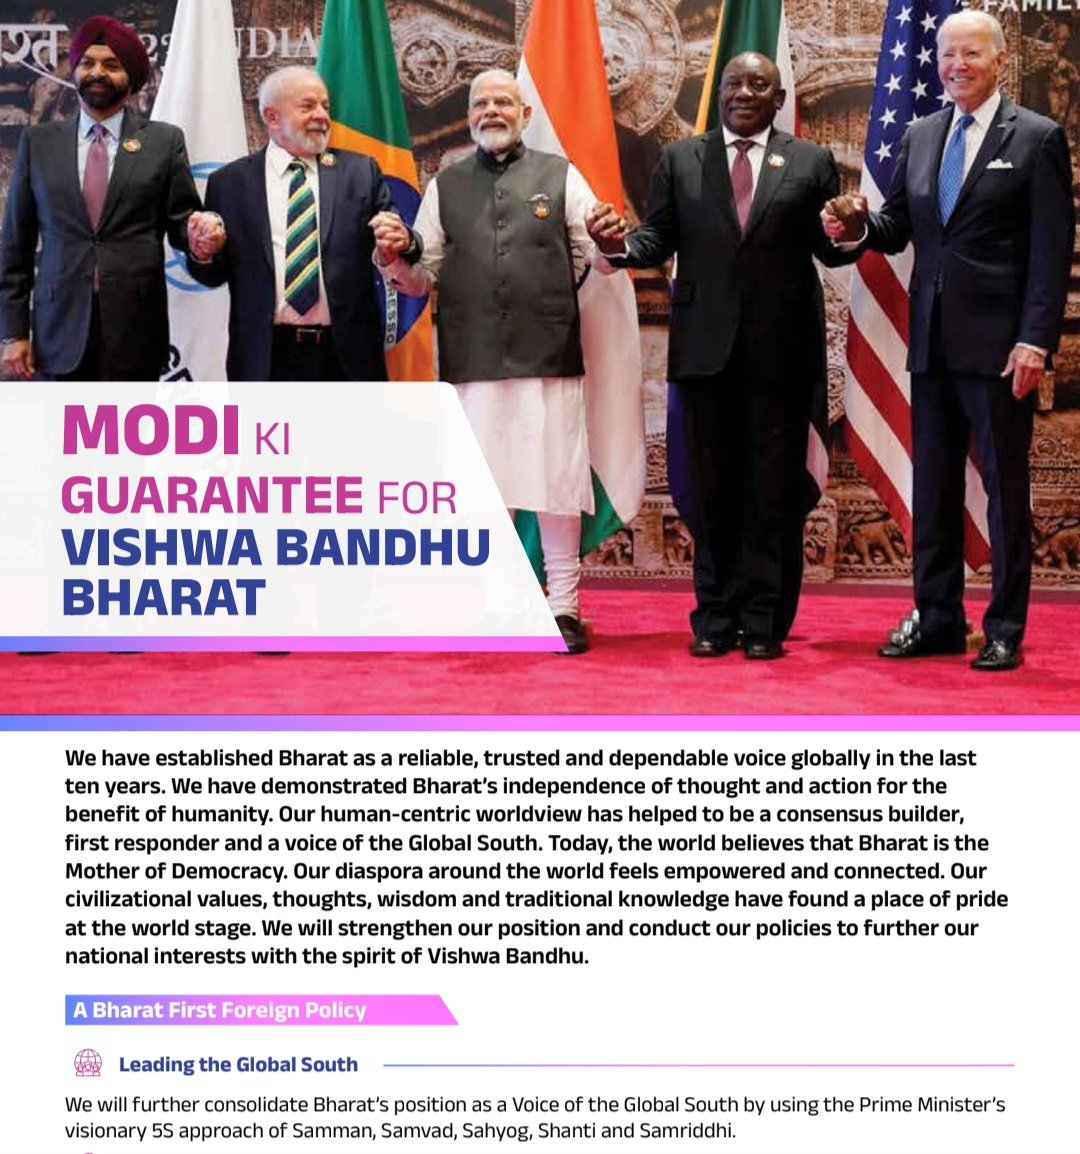 PM Modi's manefesto is out just before the election. On foreign policy, the first goal is 'Leading the Global South'. India aims to strenthen its position as a 'Voice of the Global South.' 'Global South' is mentioned 6 times in the manifesto. 'Indo-Pacific' just once. (1/2)